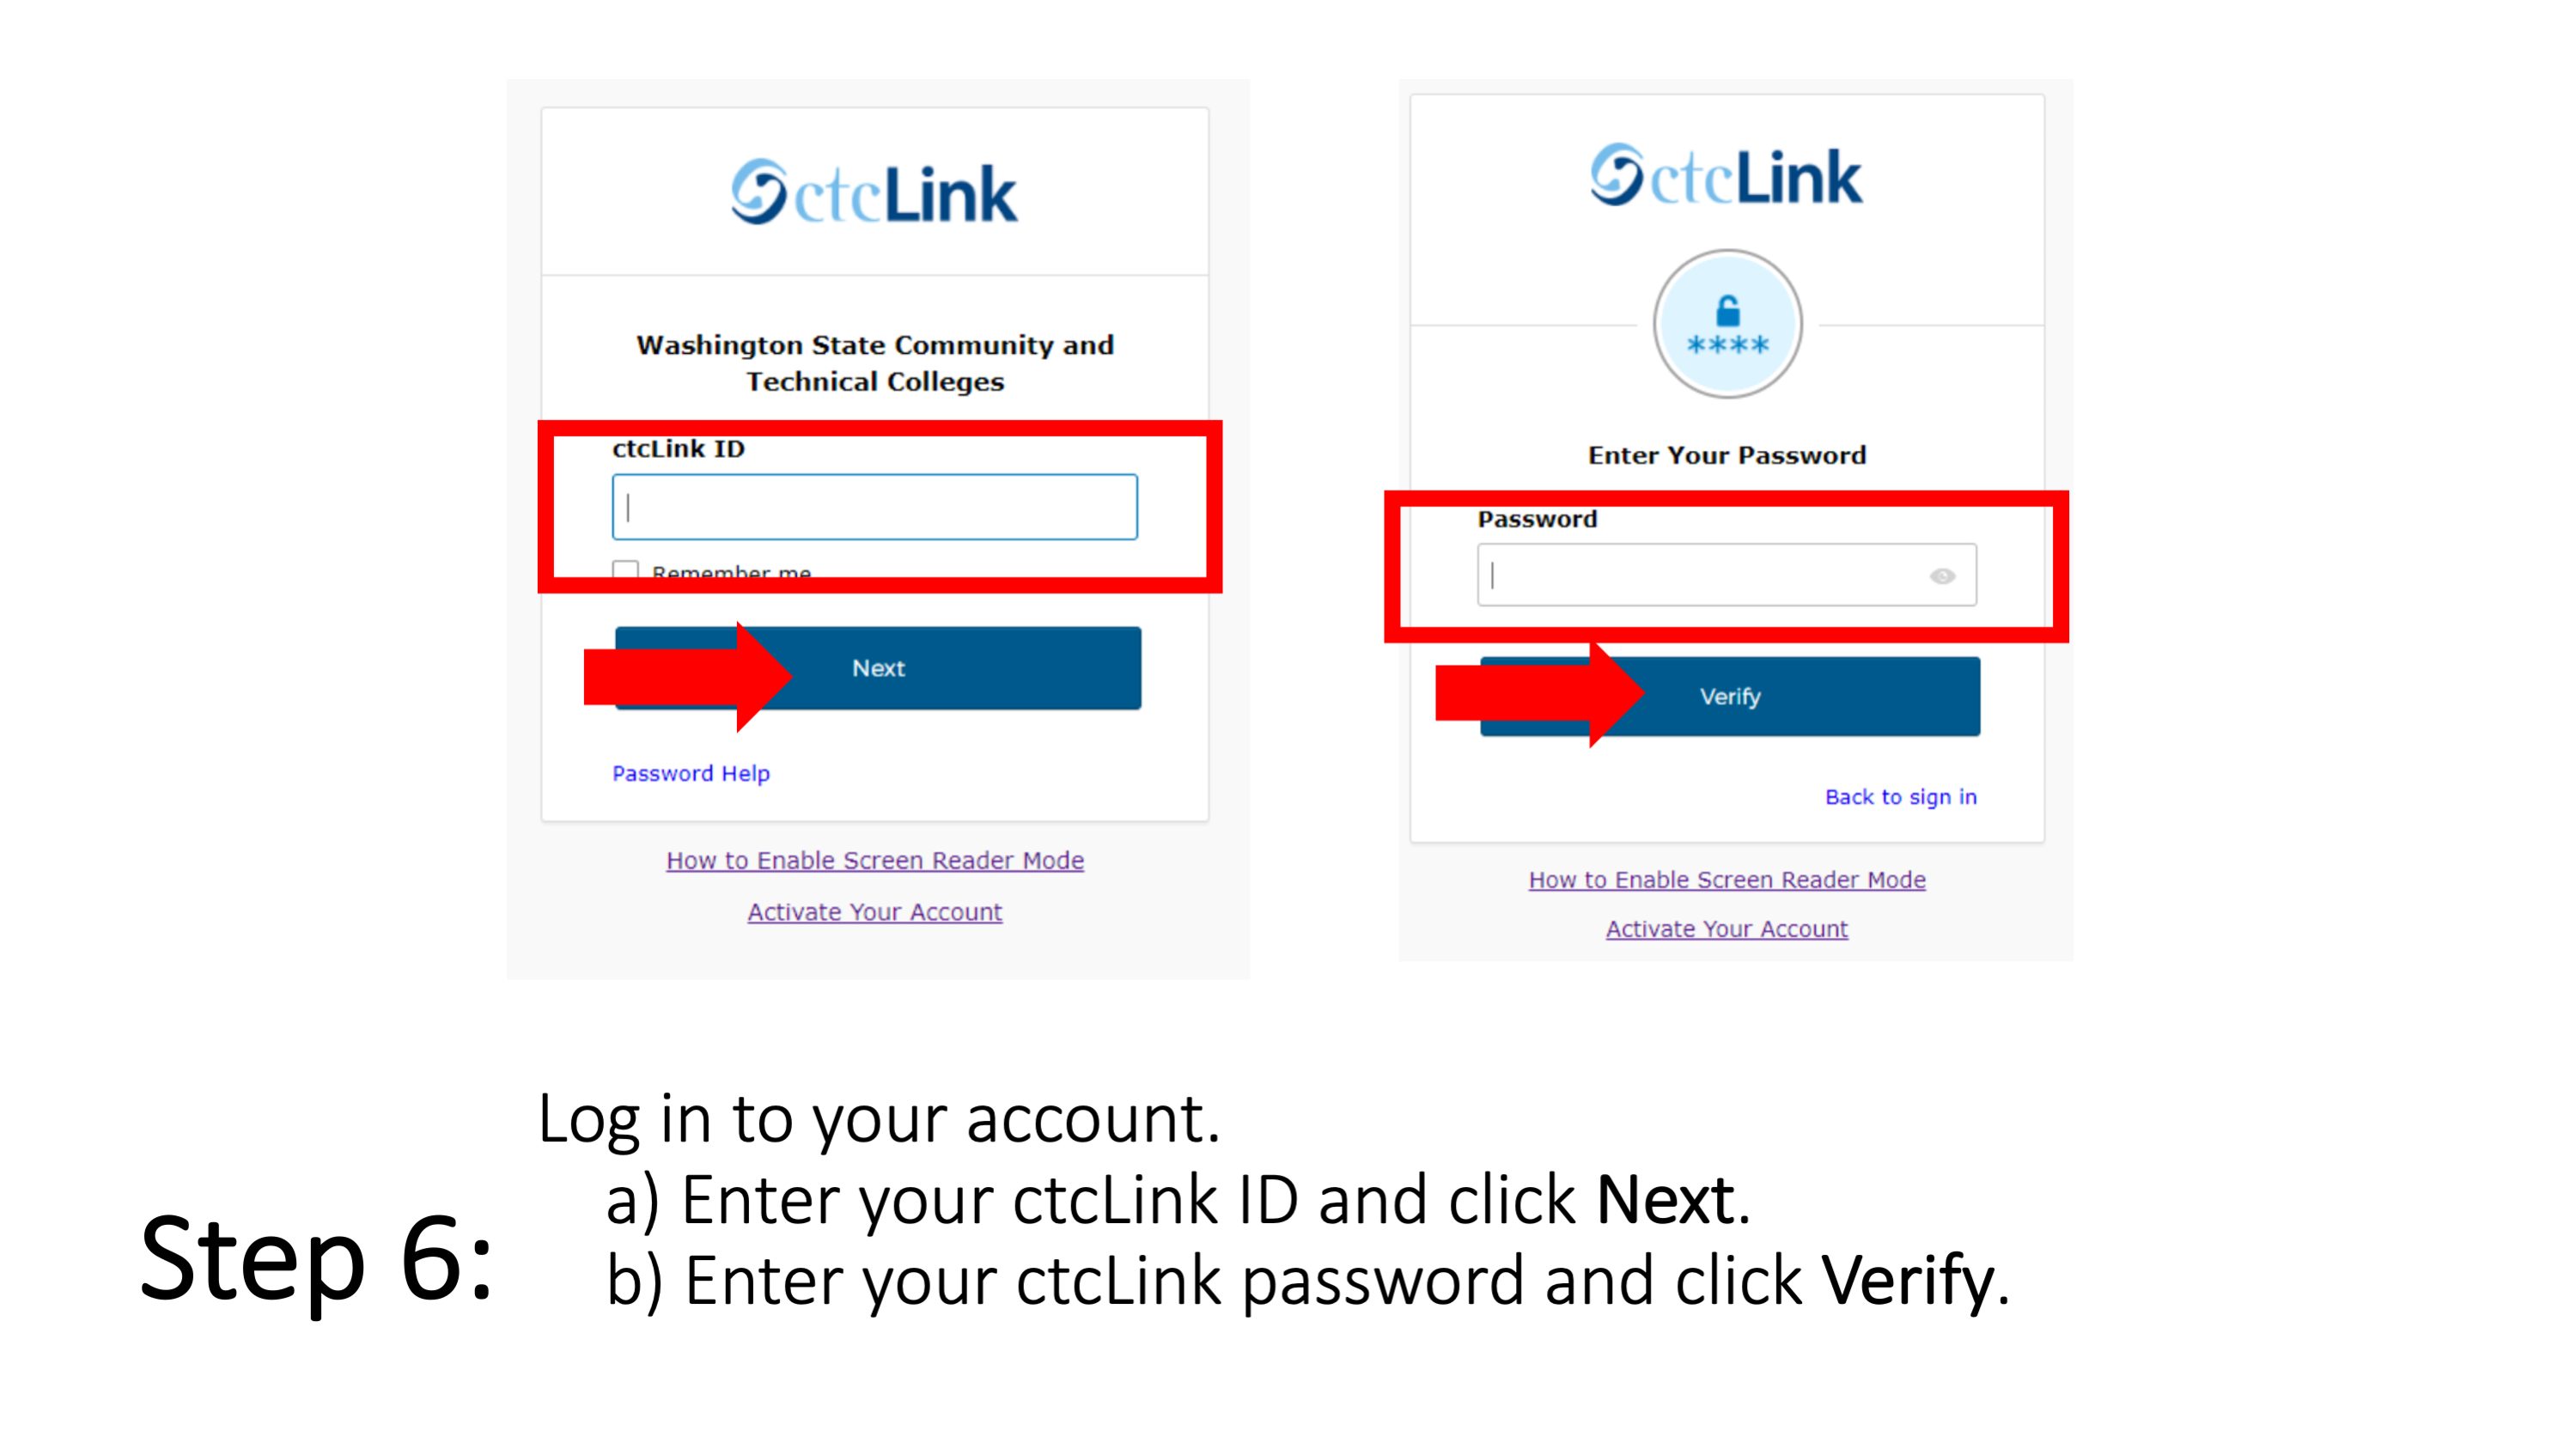 Step 6: Log in to your account. a) Enter your ctcLink ID and click Next. b) Enter your ctcLink password and click Verify.